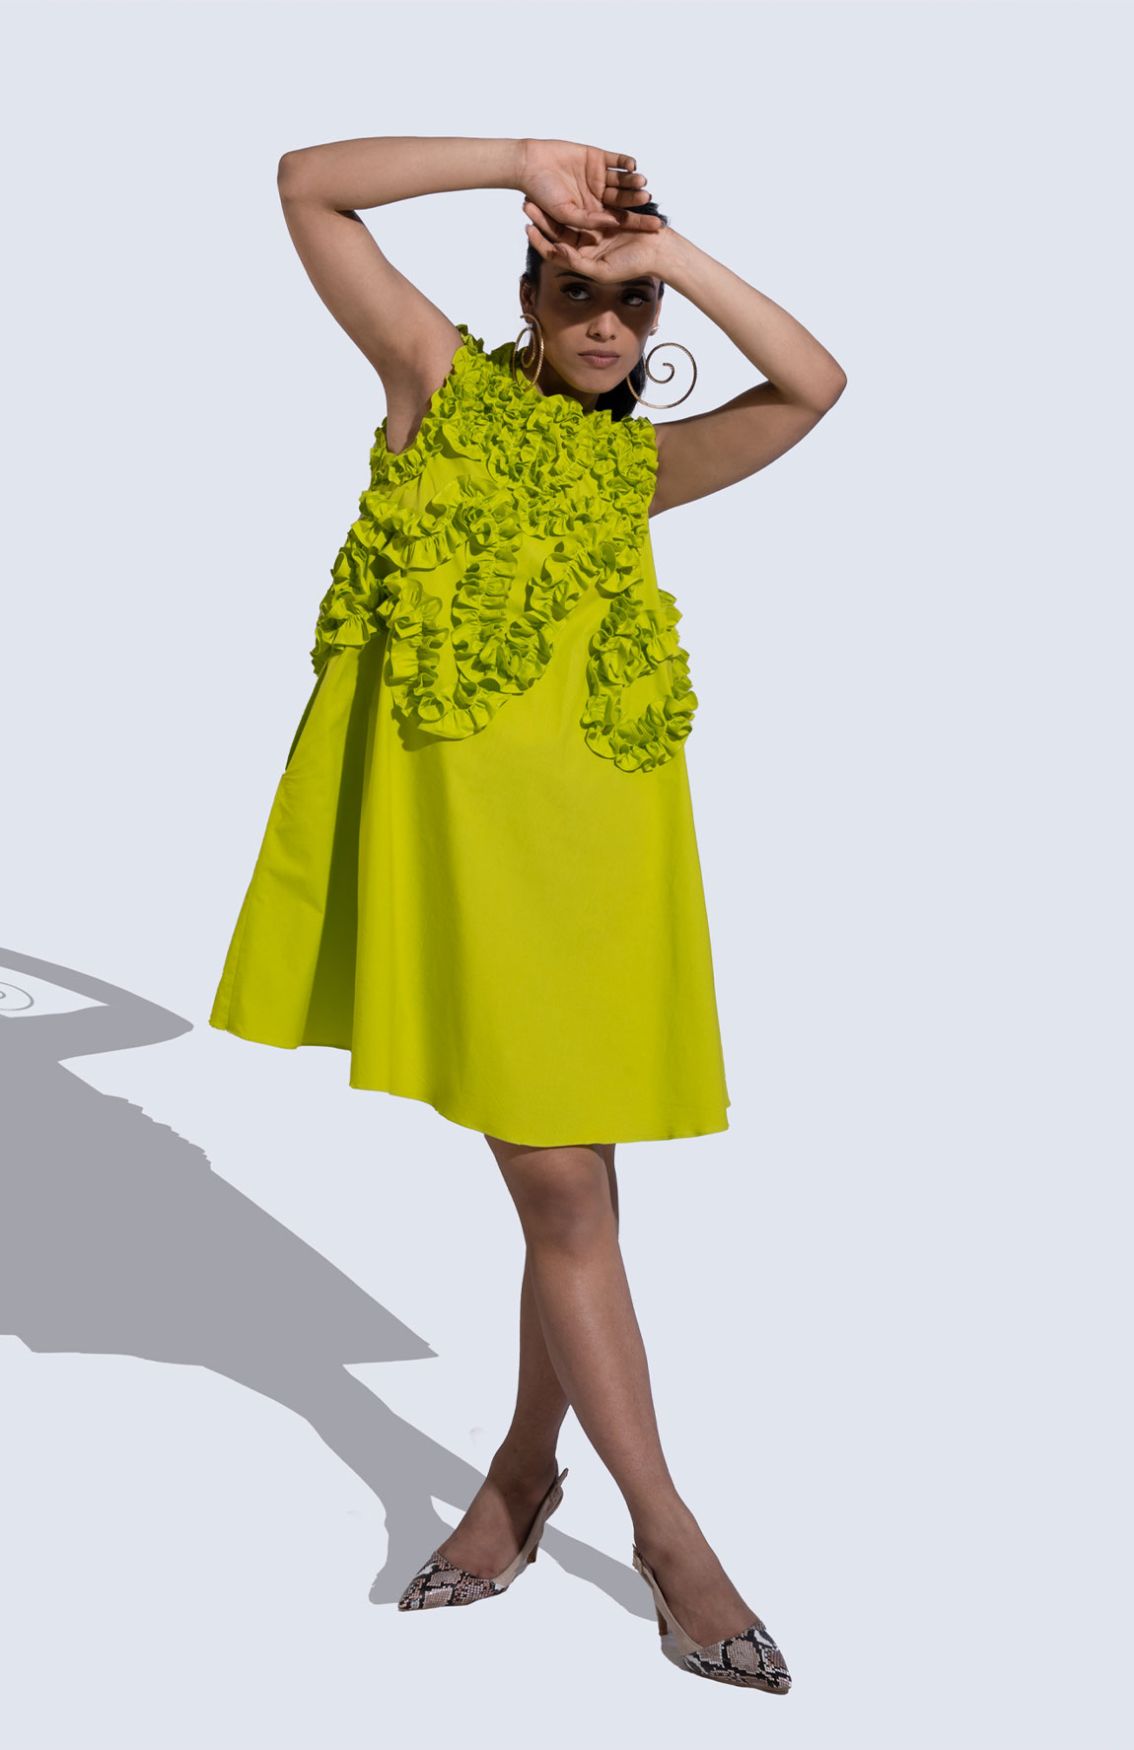 The Lime Green Dress